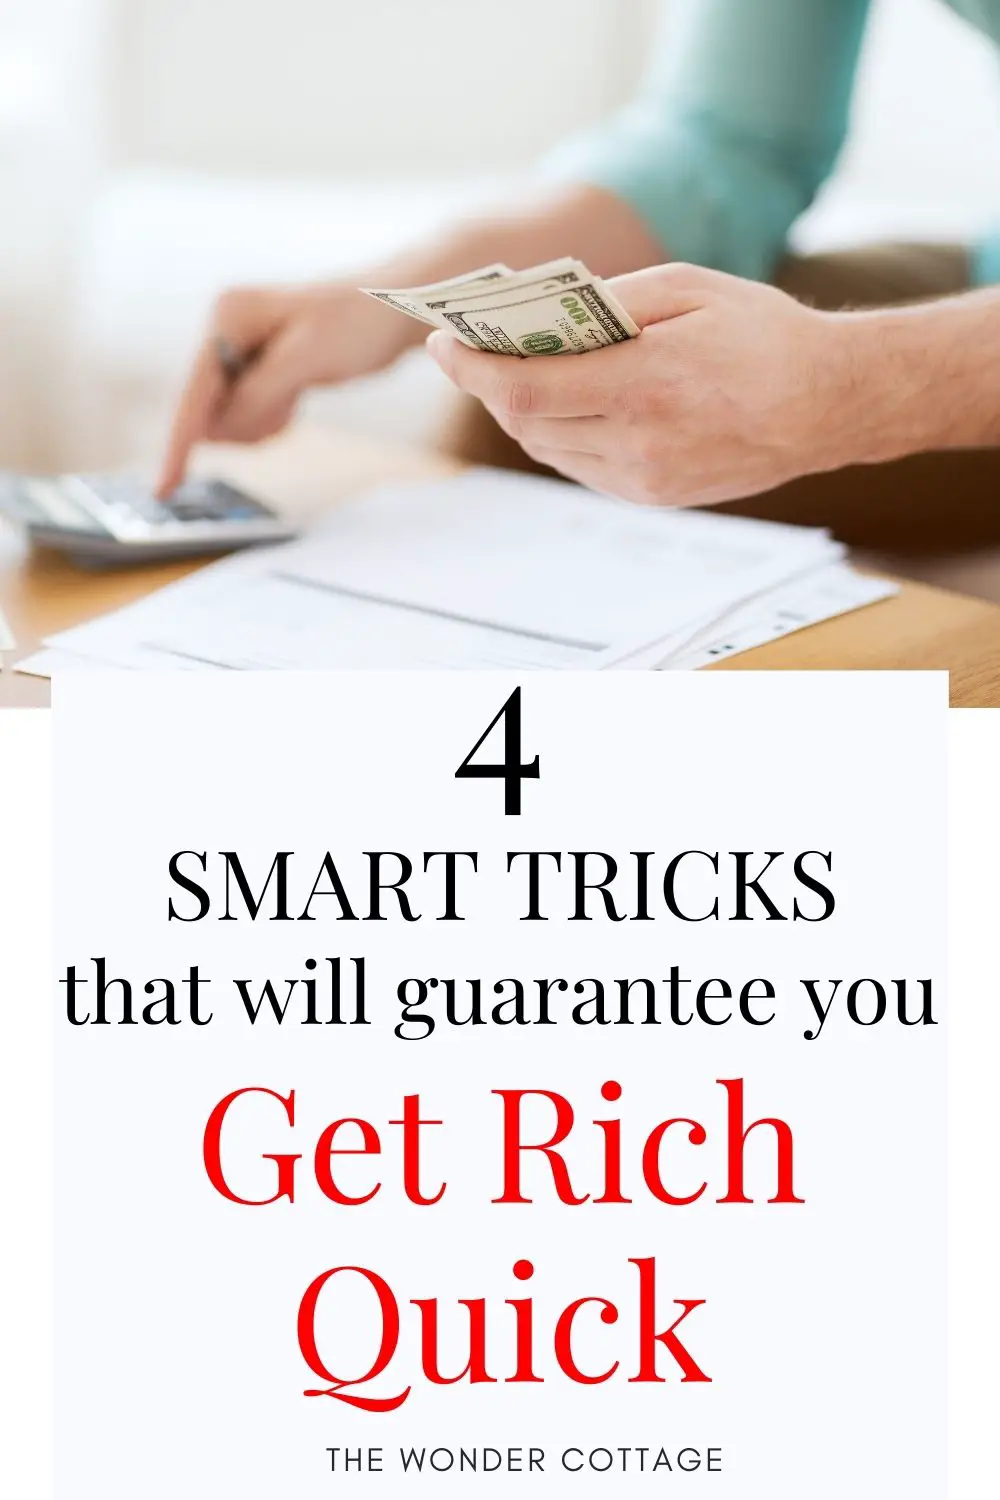 4 smart tricks that will guarantee you get rich quick